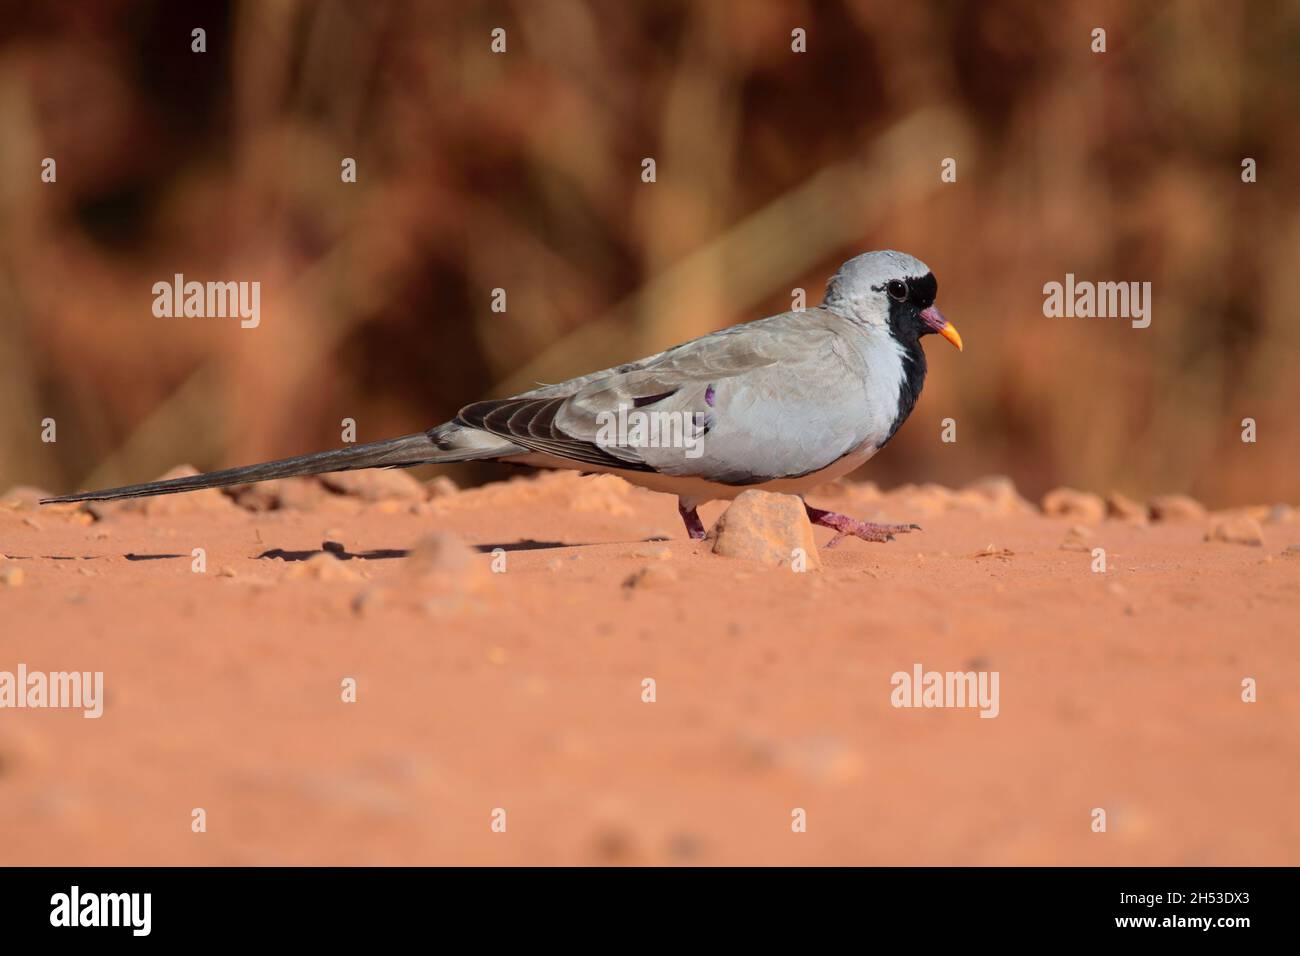 An adult male Namaqua dove (Oena capensis) feeding on the ground in the Gambia, West Africa Stock Photo